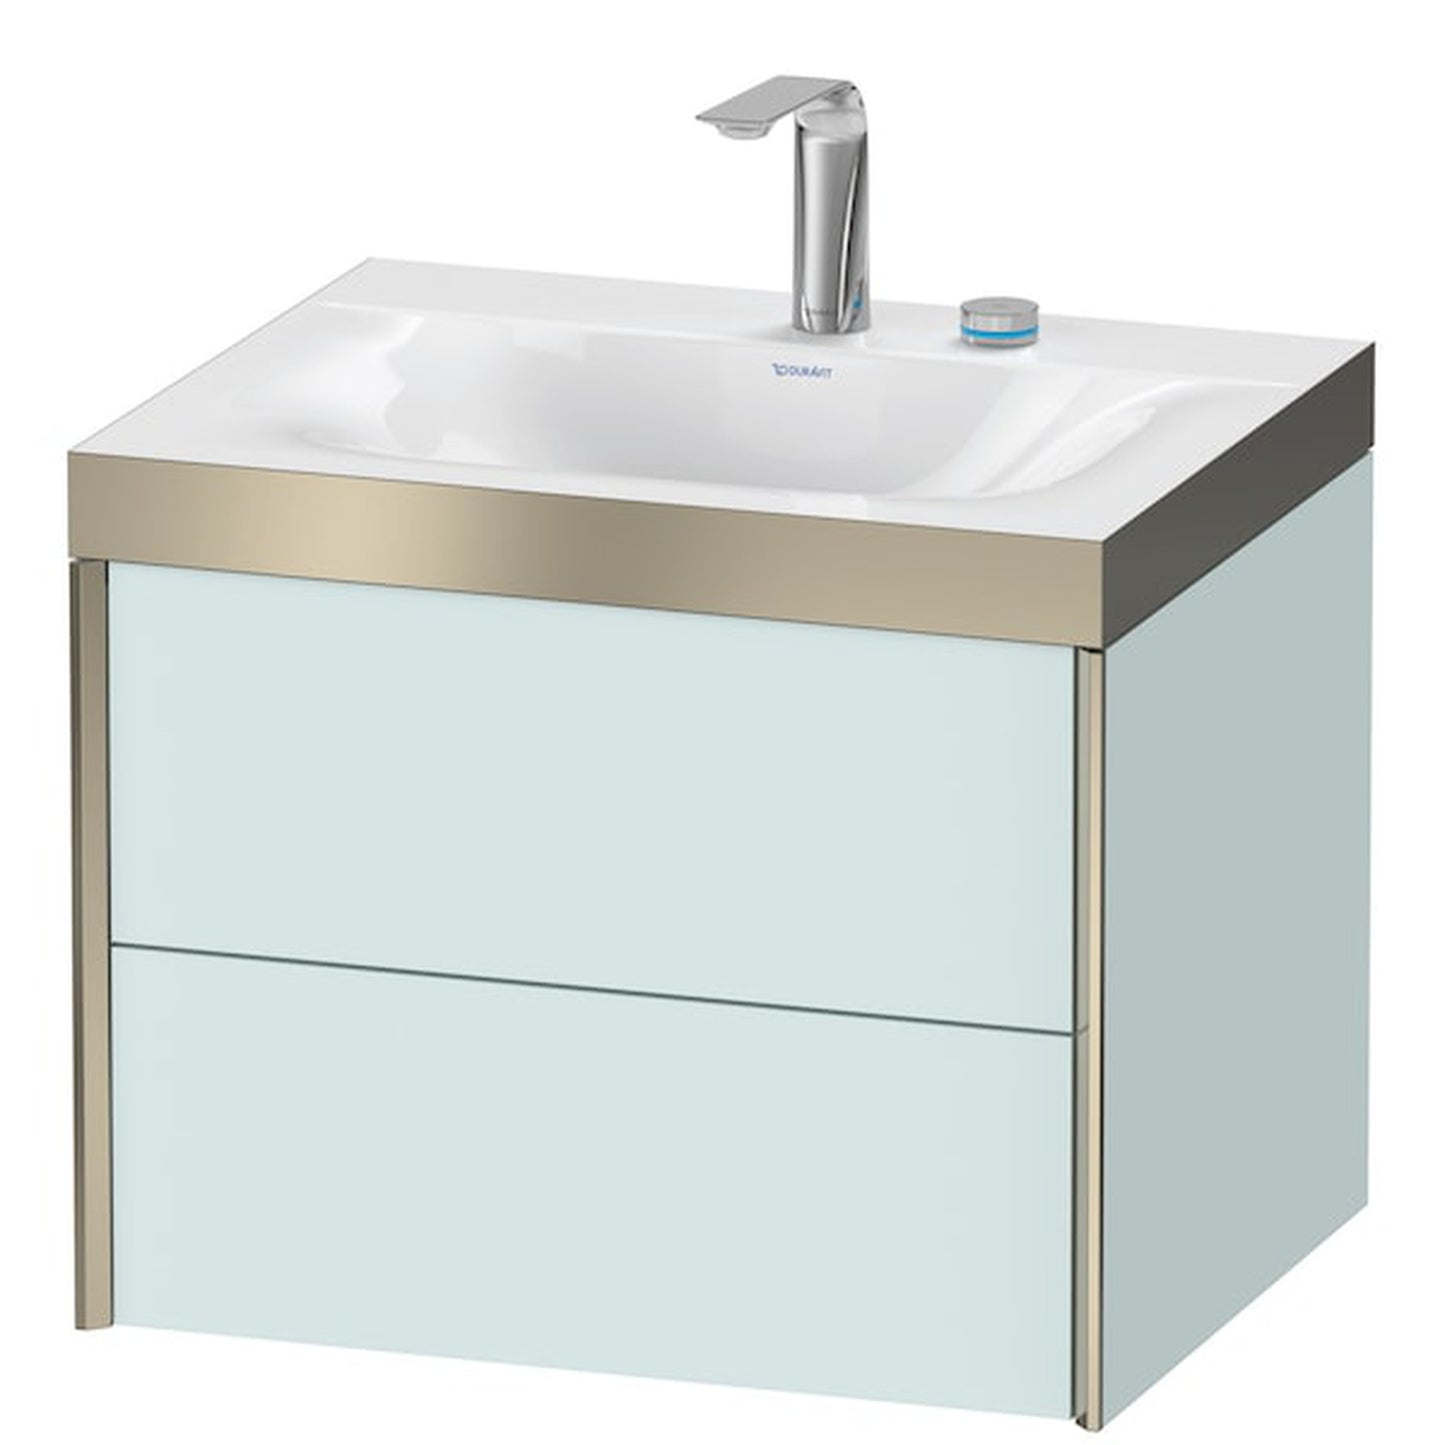 Duravit Xviu 24" x 20" x 19" Two Drawer C-Bonded Wall-Mount Vanity Kit With Two Tap Holes, Light Blue (XV4614EB109P)